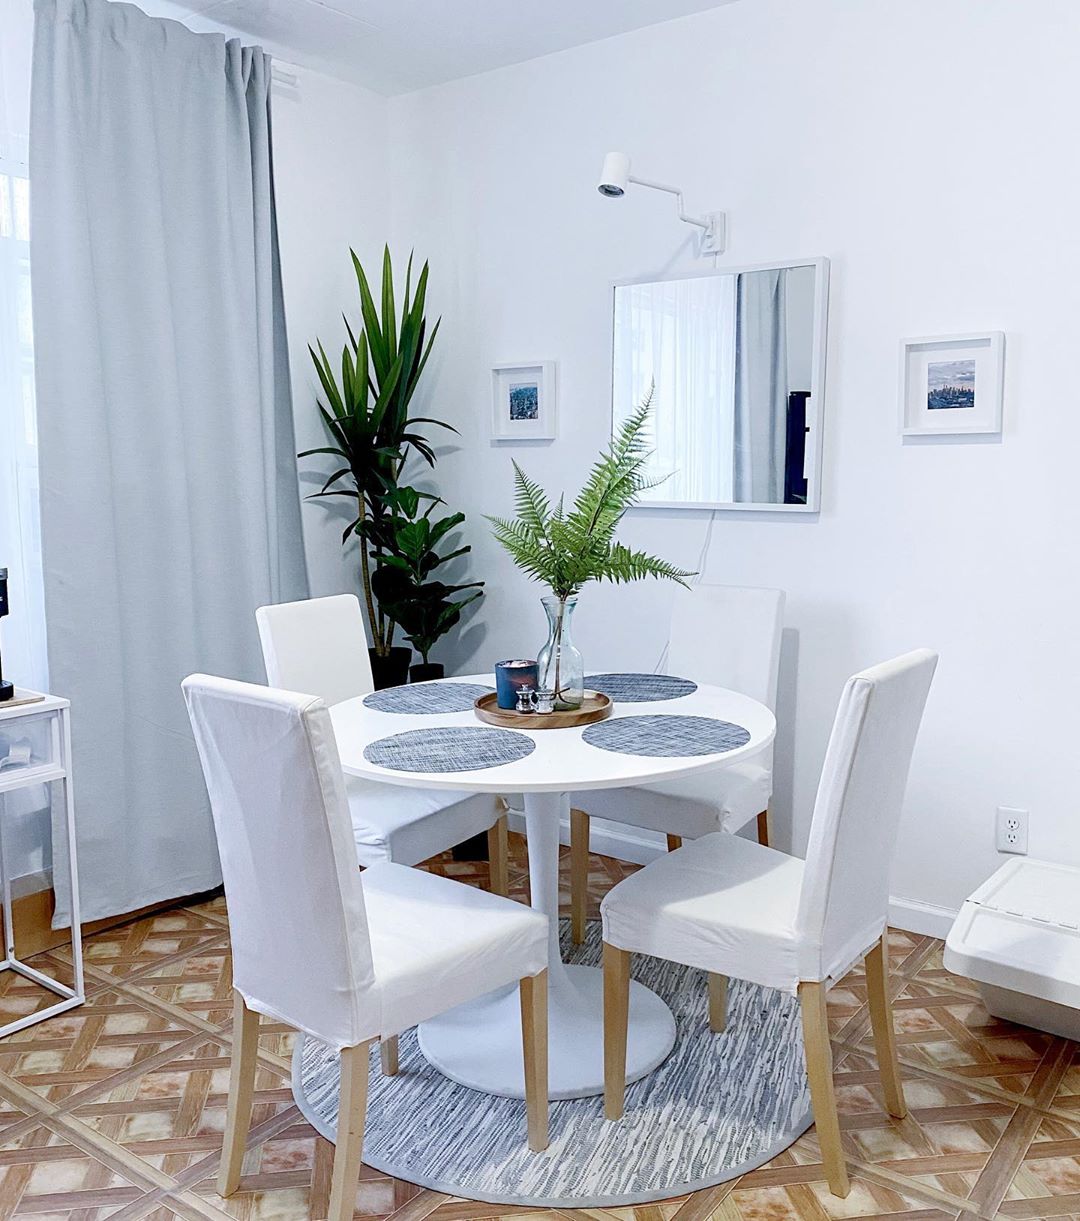 Small dining table in white apartment. Photo by Instagram user @fgpavon